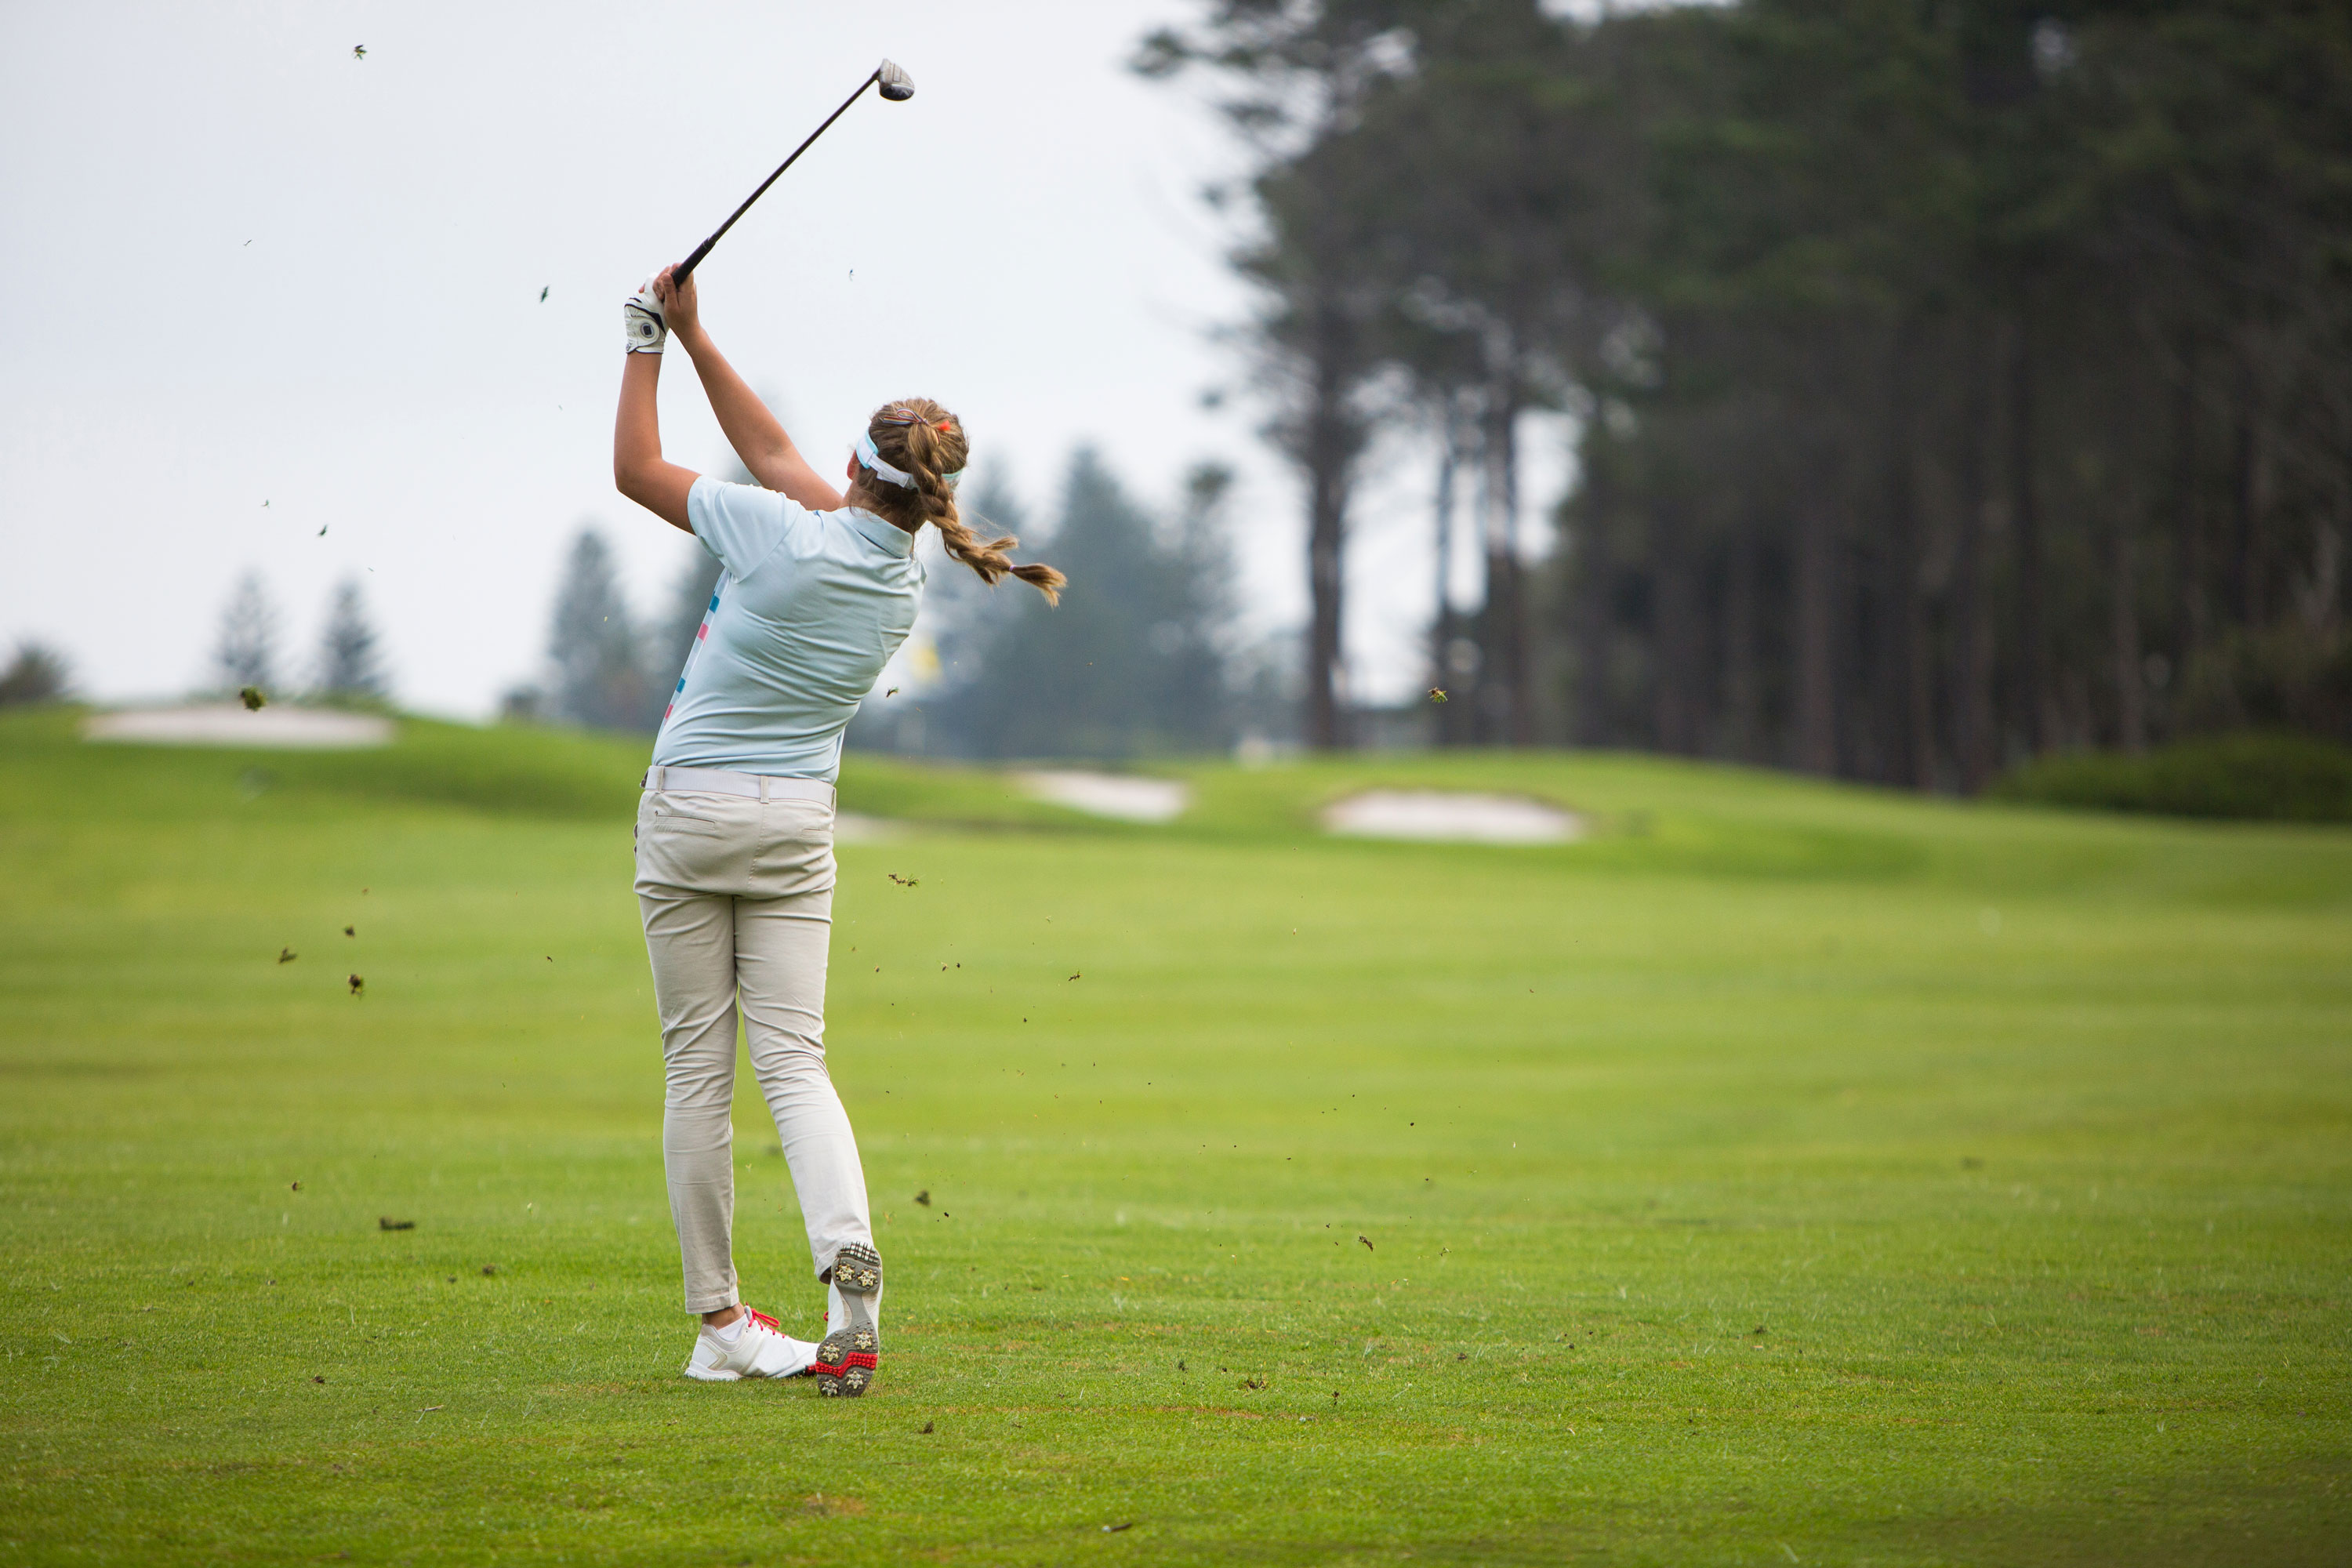 Safety Tips to Prevent Golfing-Related Injuries